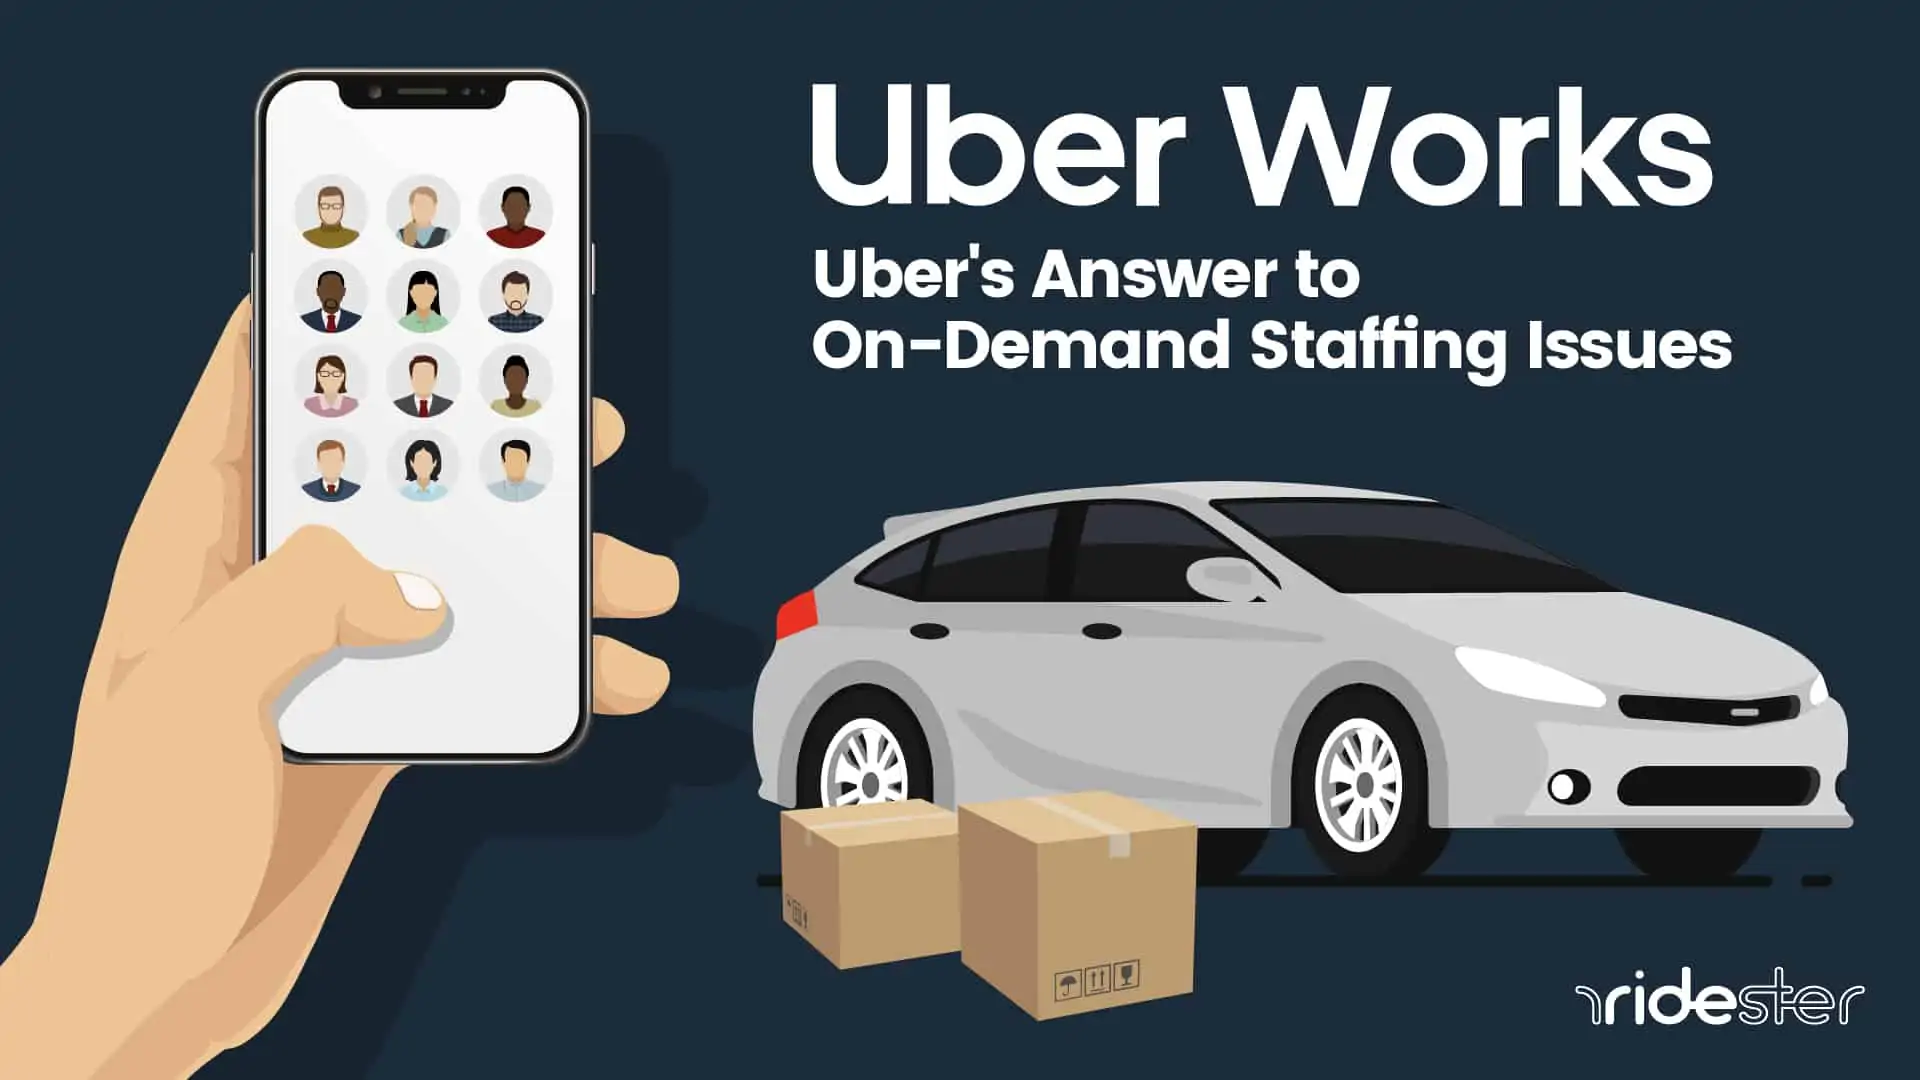 vector graphic showing hand holding phone and a car with the Uber Works title and description below it